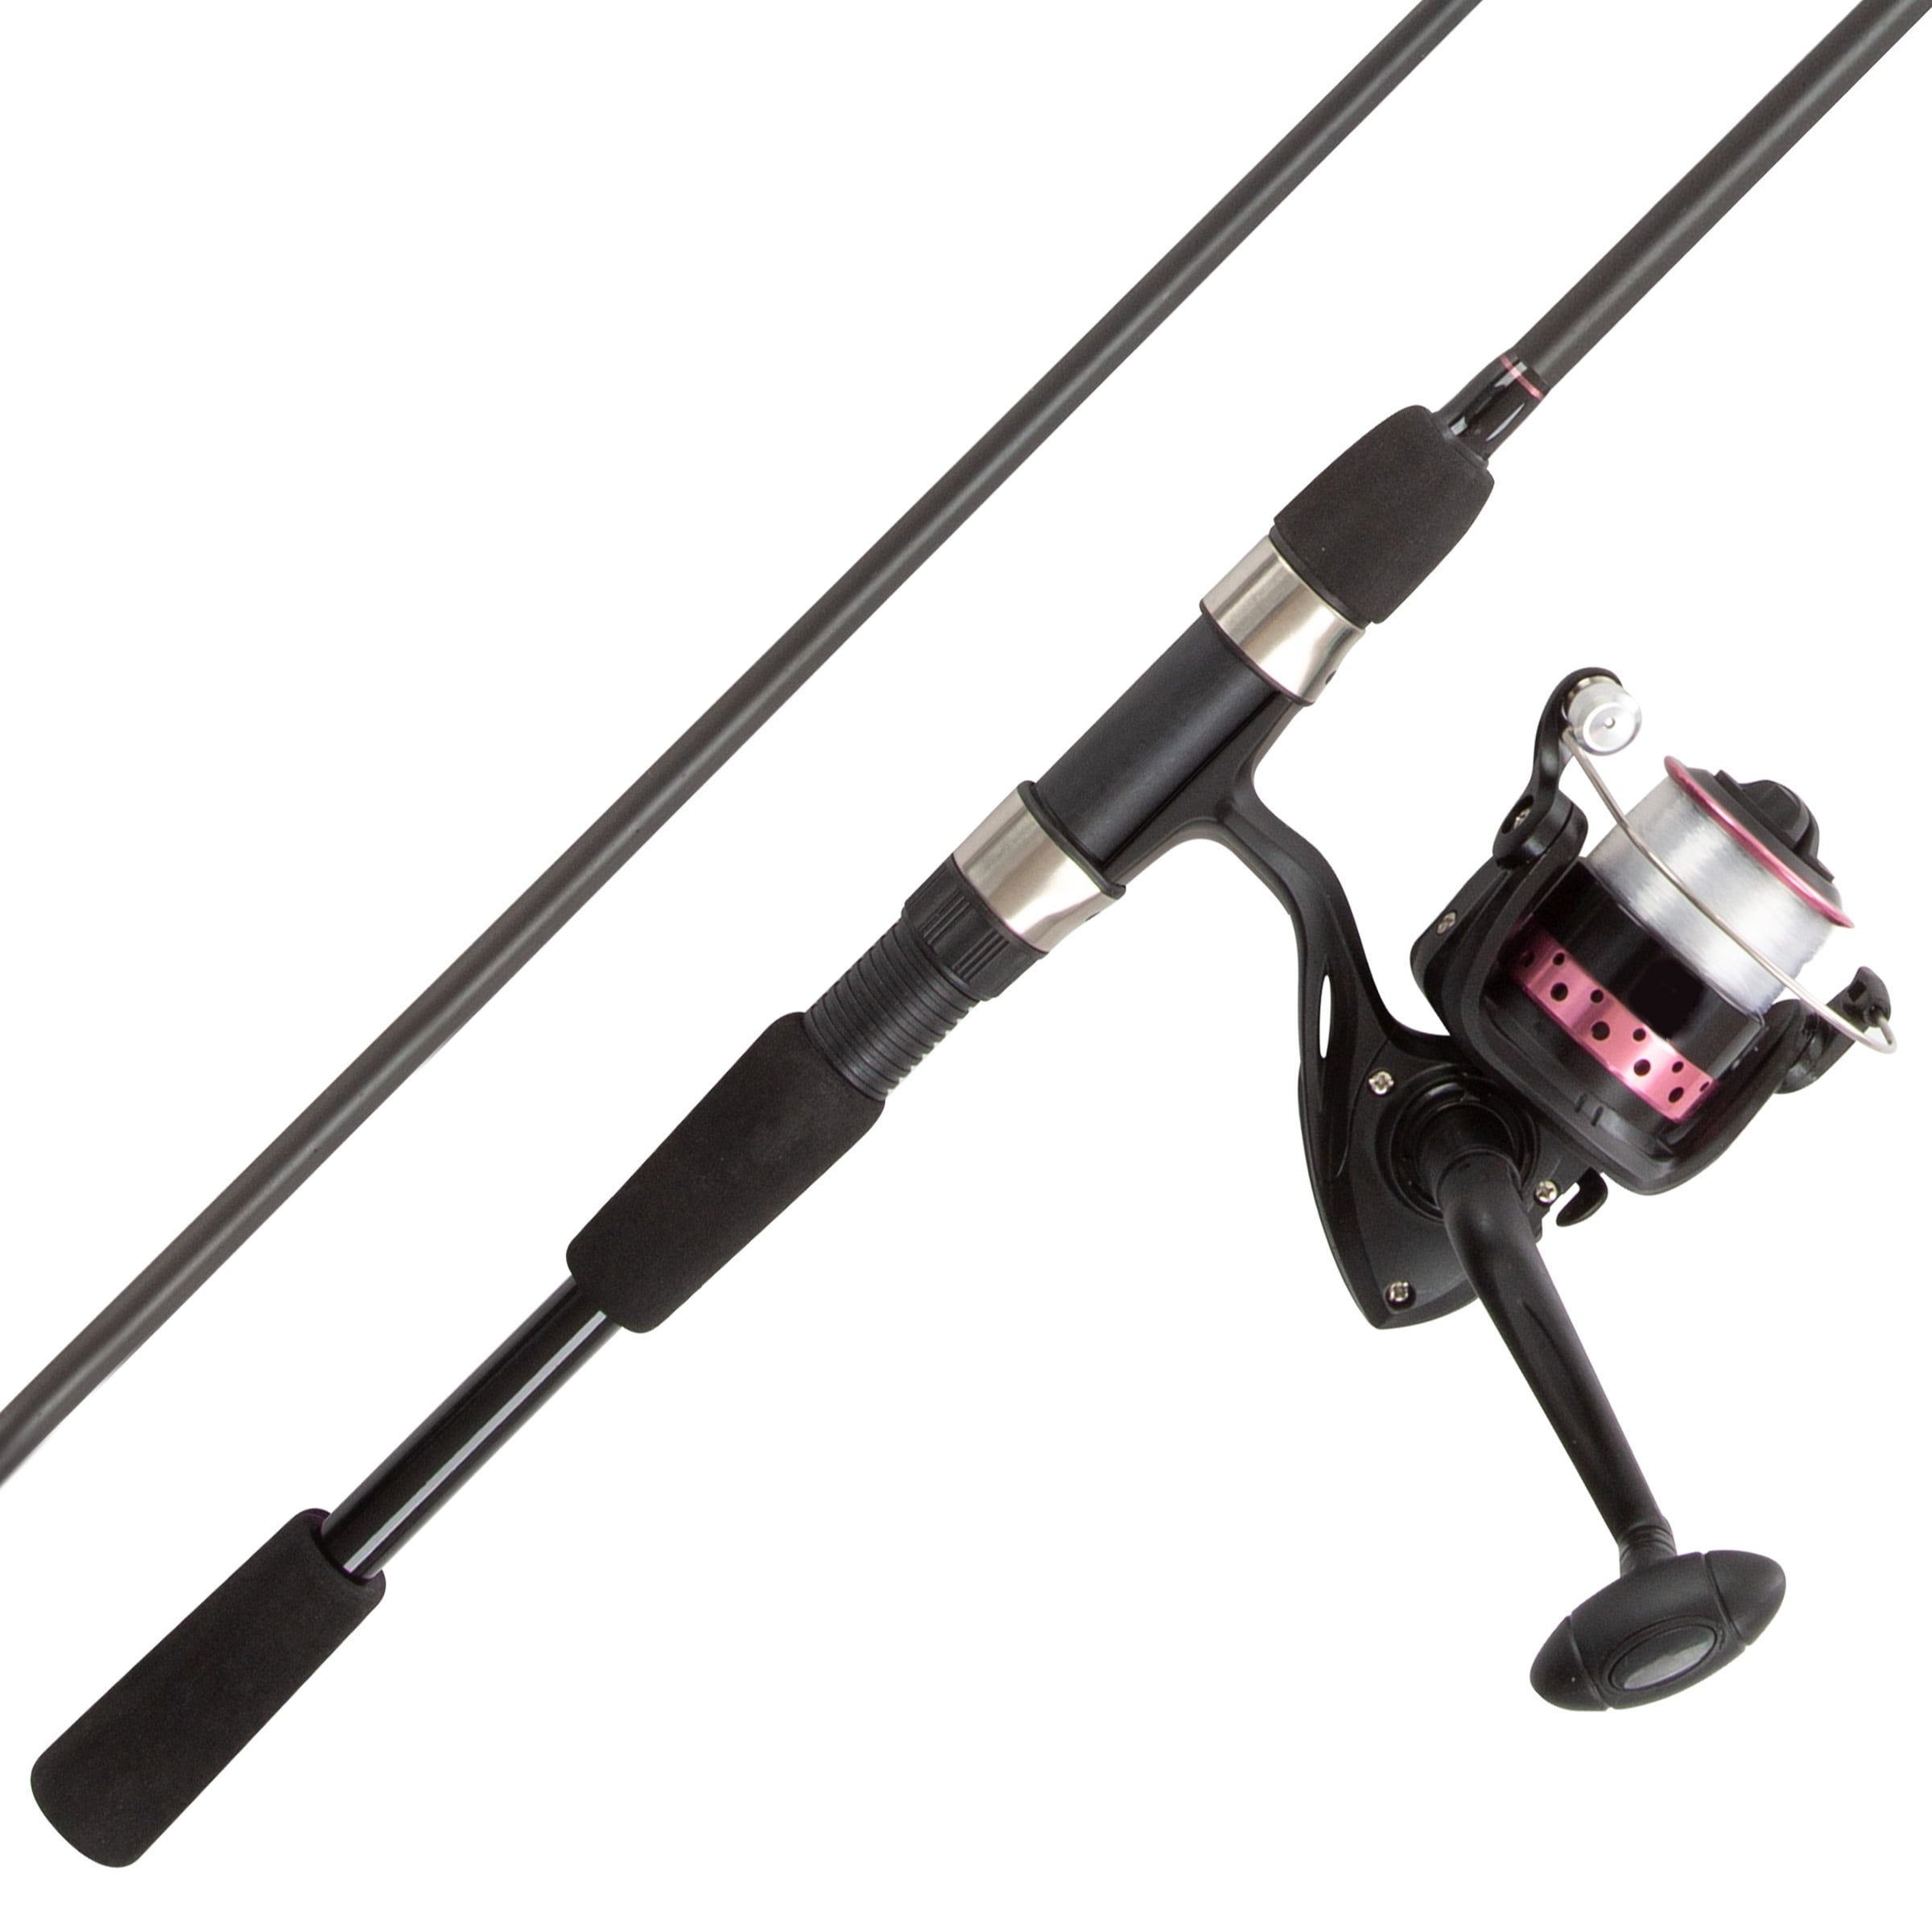 Ugly Stik 7' GX2 Spinning Fishing Rod And Reel Spinning, 40% OFF